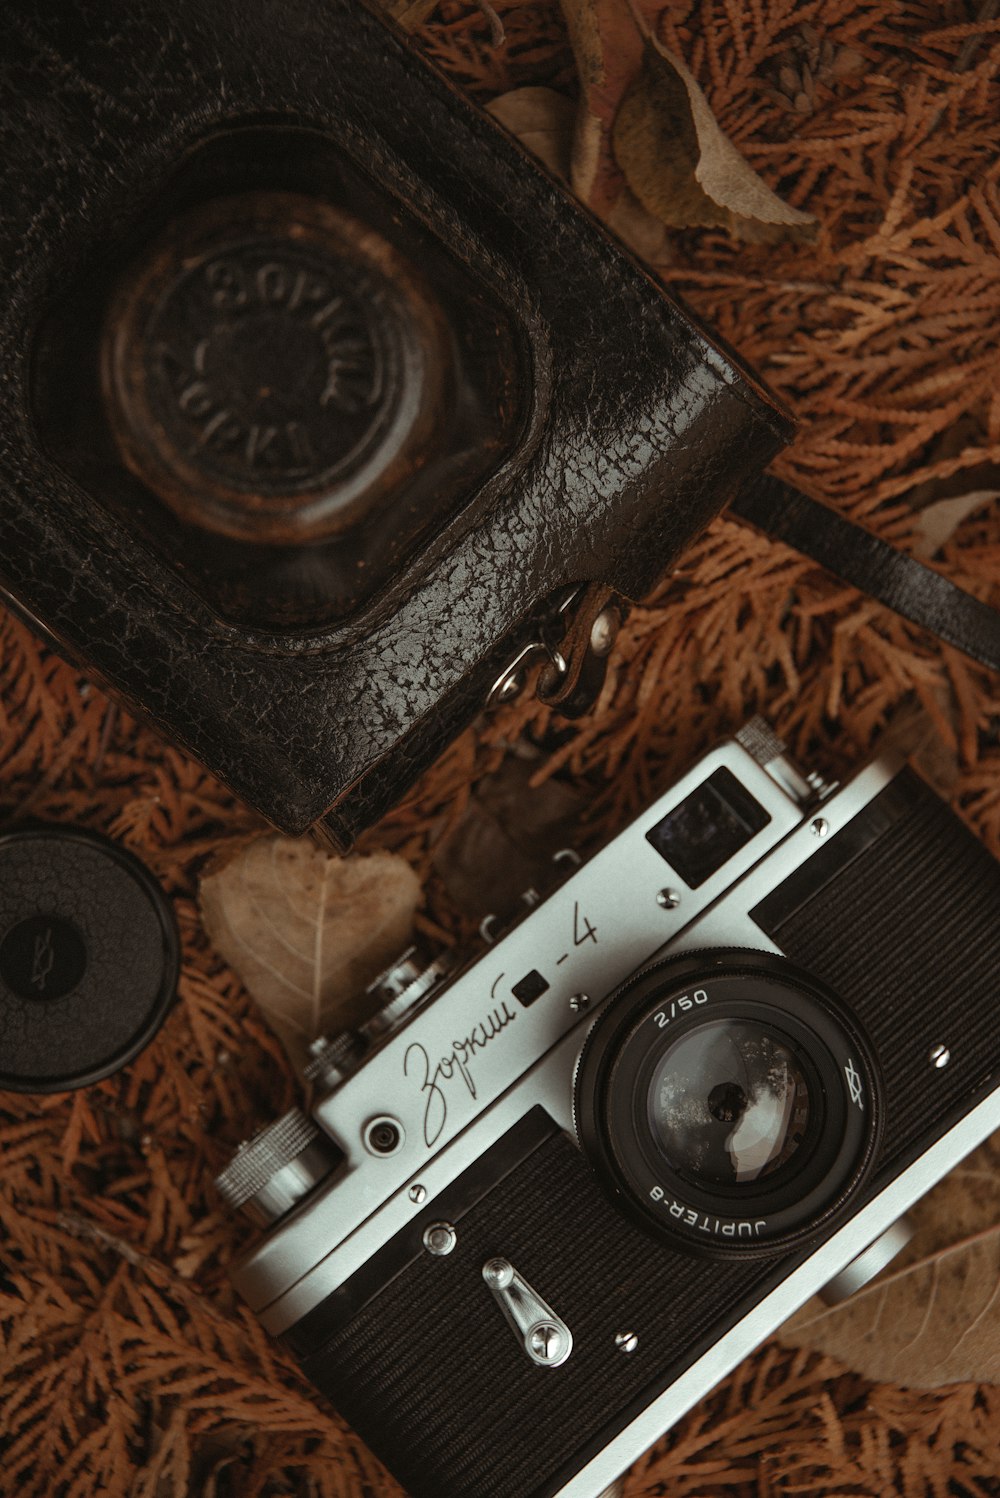 an old camera and some other items laying on the ground